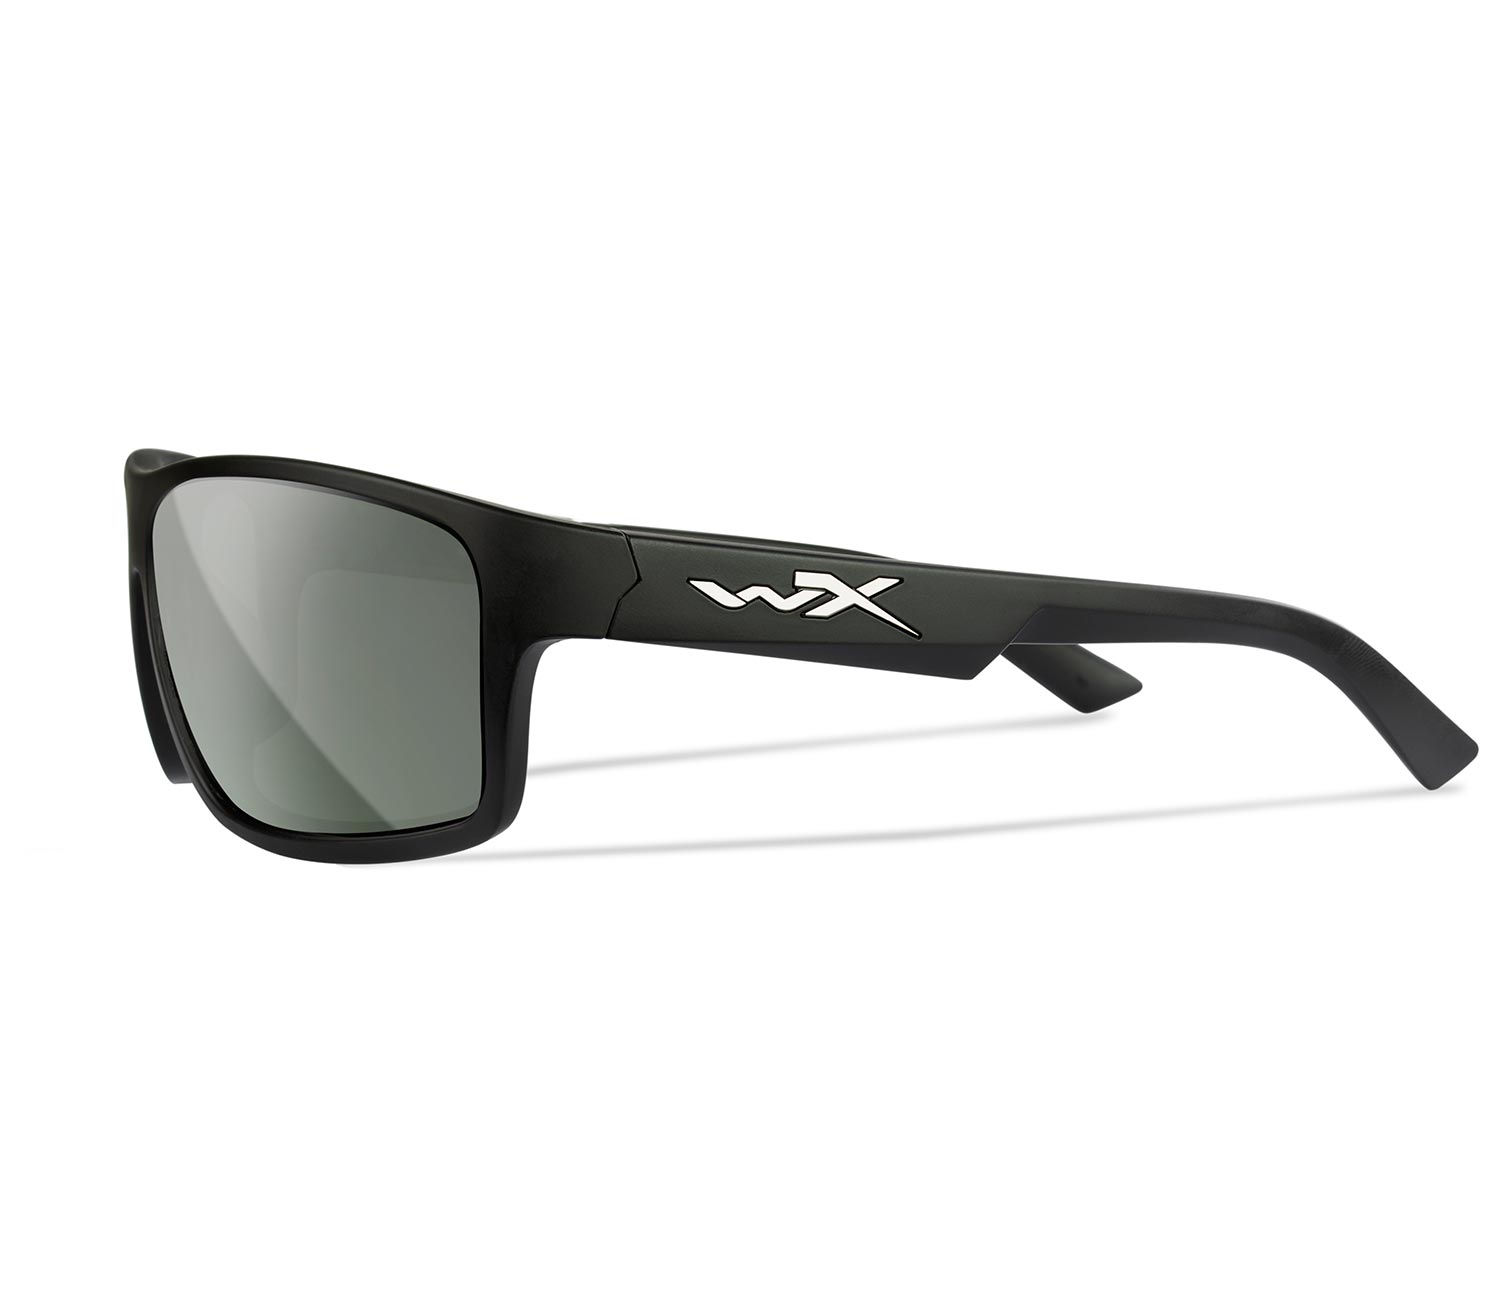 Gafas-Wiley-X-Peak-lateral